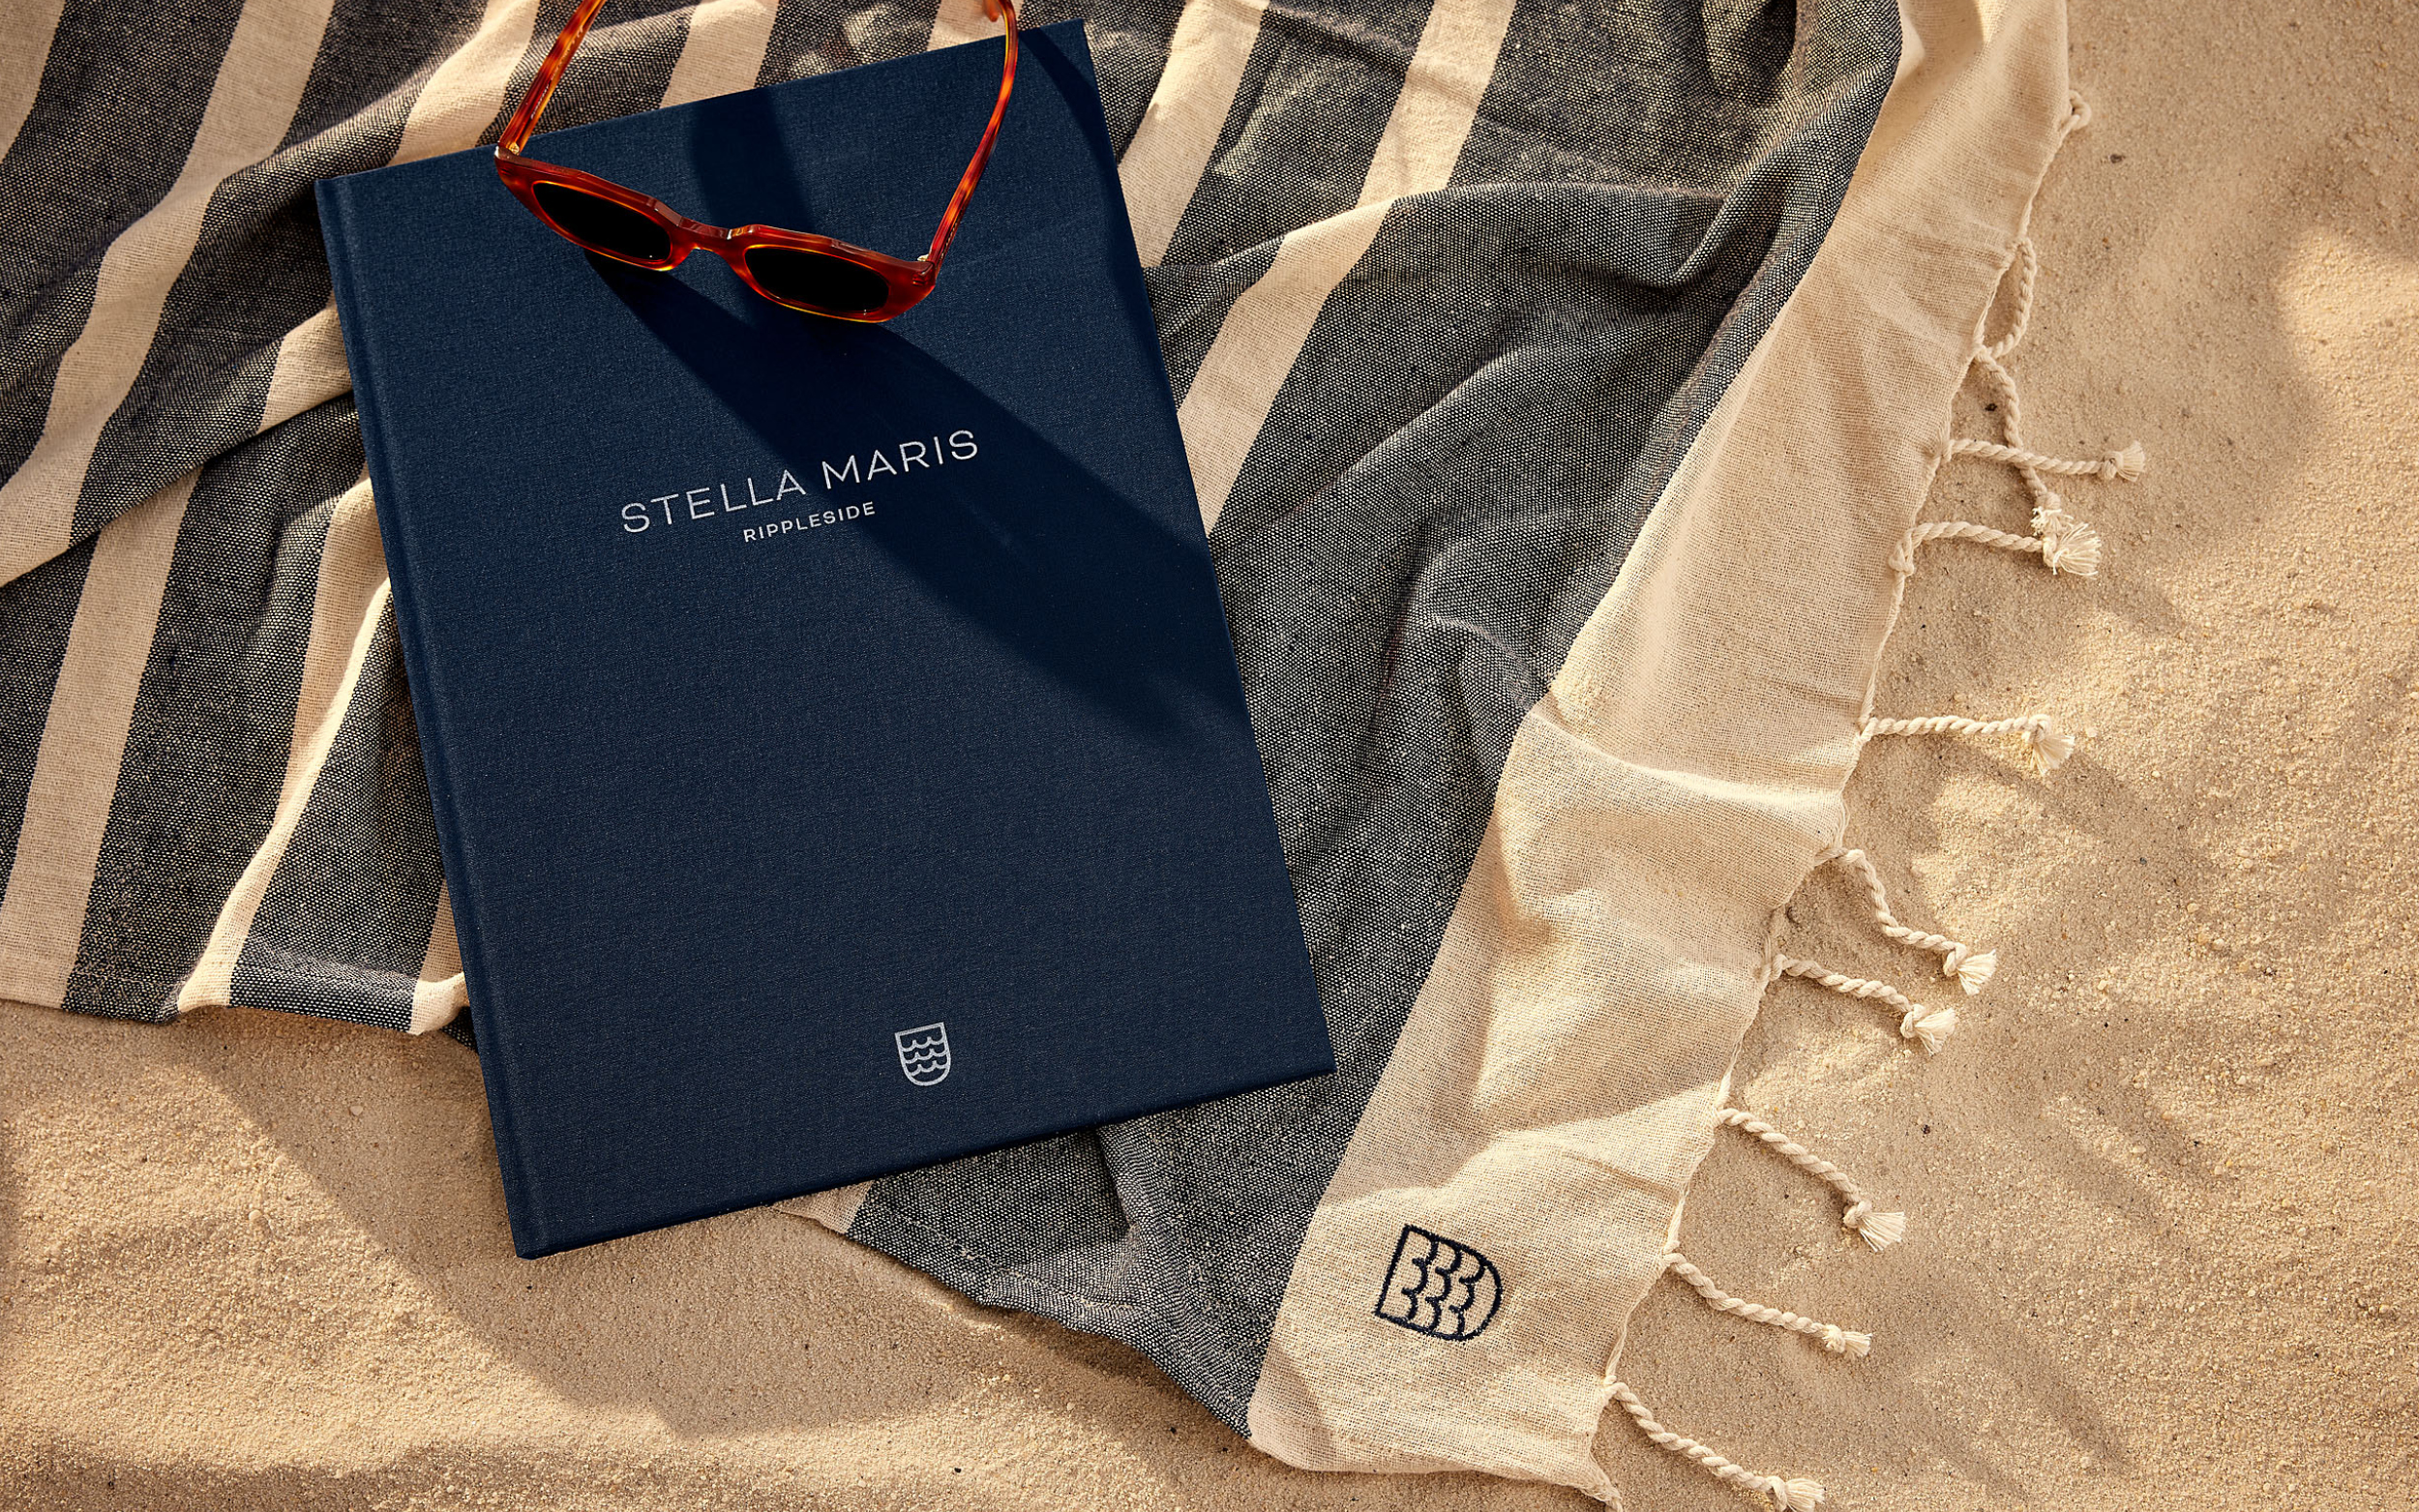 Brochure laying on branded towel in sand